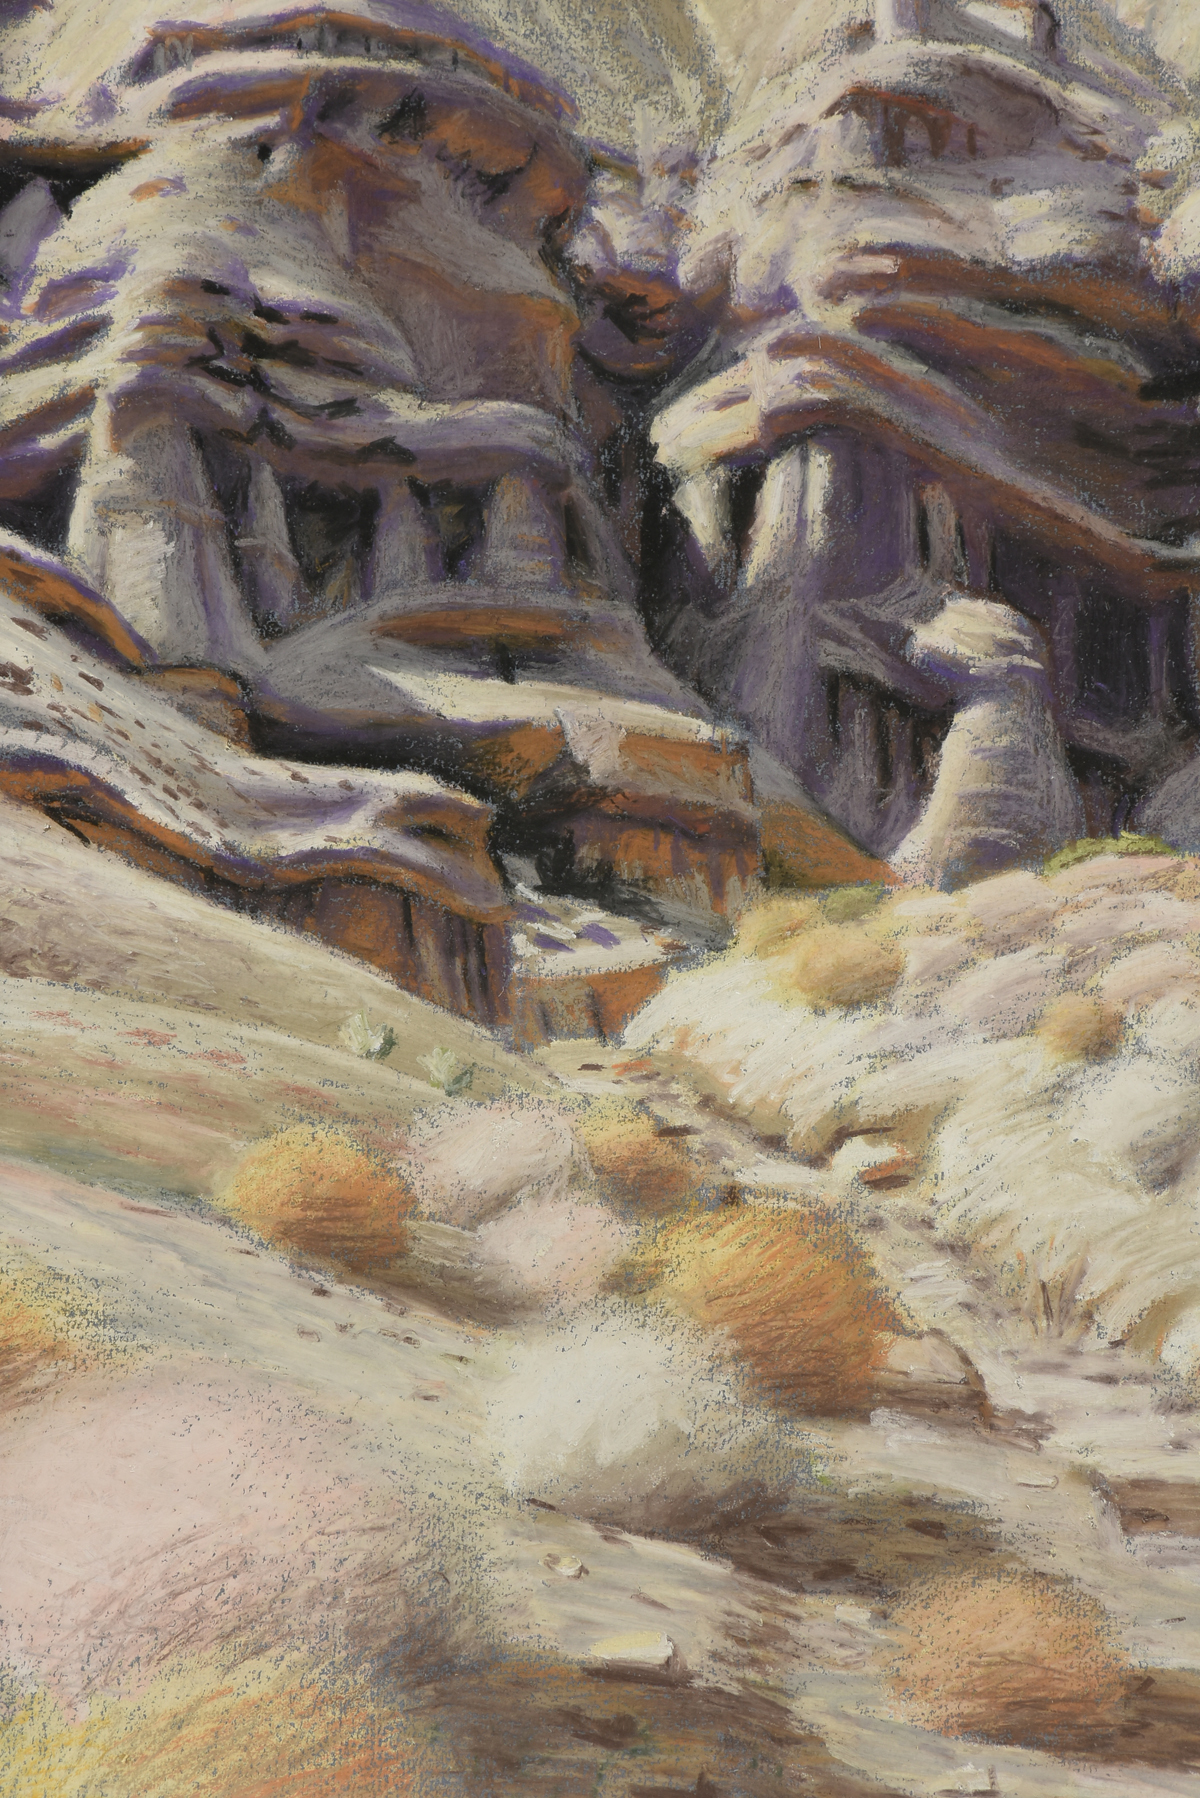 attributed to JAMES DOOLIN (American 1932-2002) A DRAWING, "Desert Dwellers," pastel on paper. 25" x - Image 9 of 11